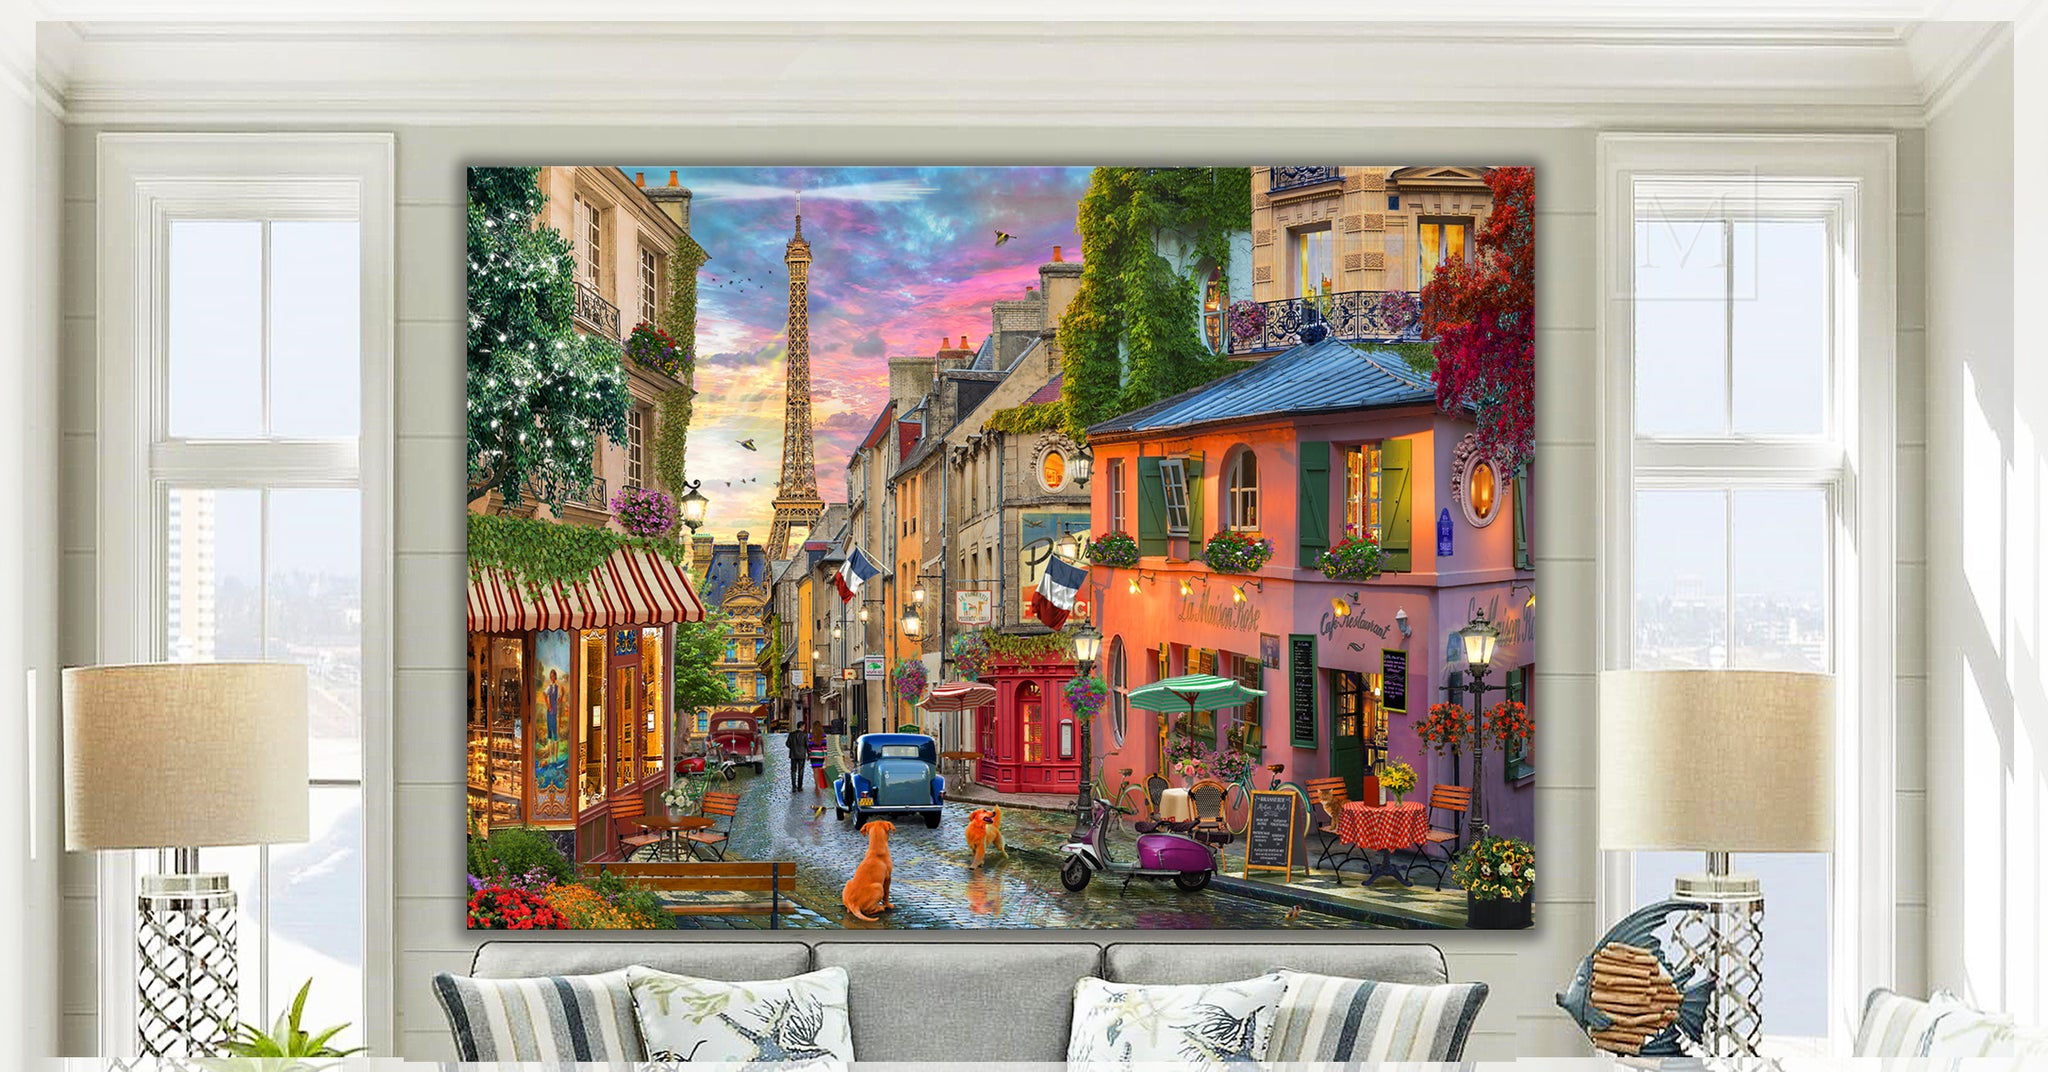 Sunset Over Paris   _______________________________    Order Options Here